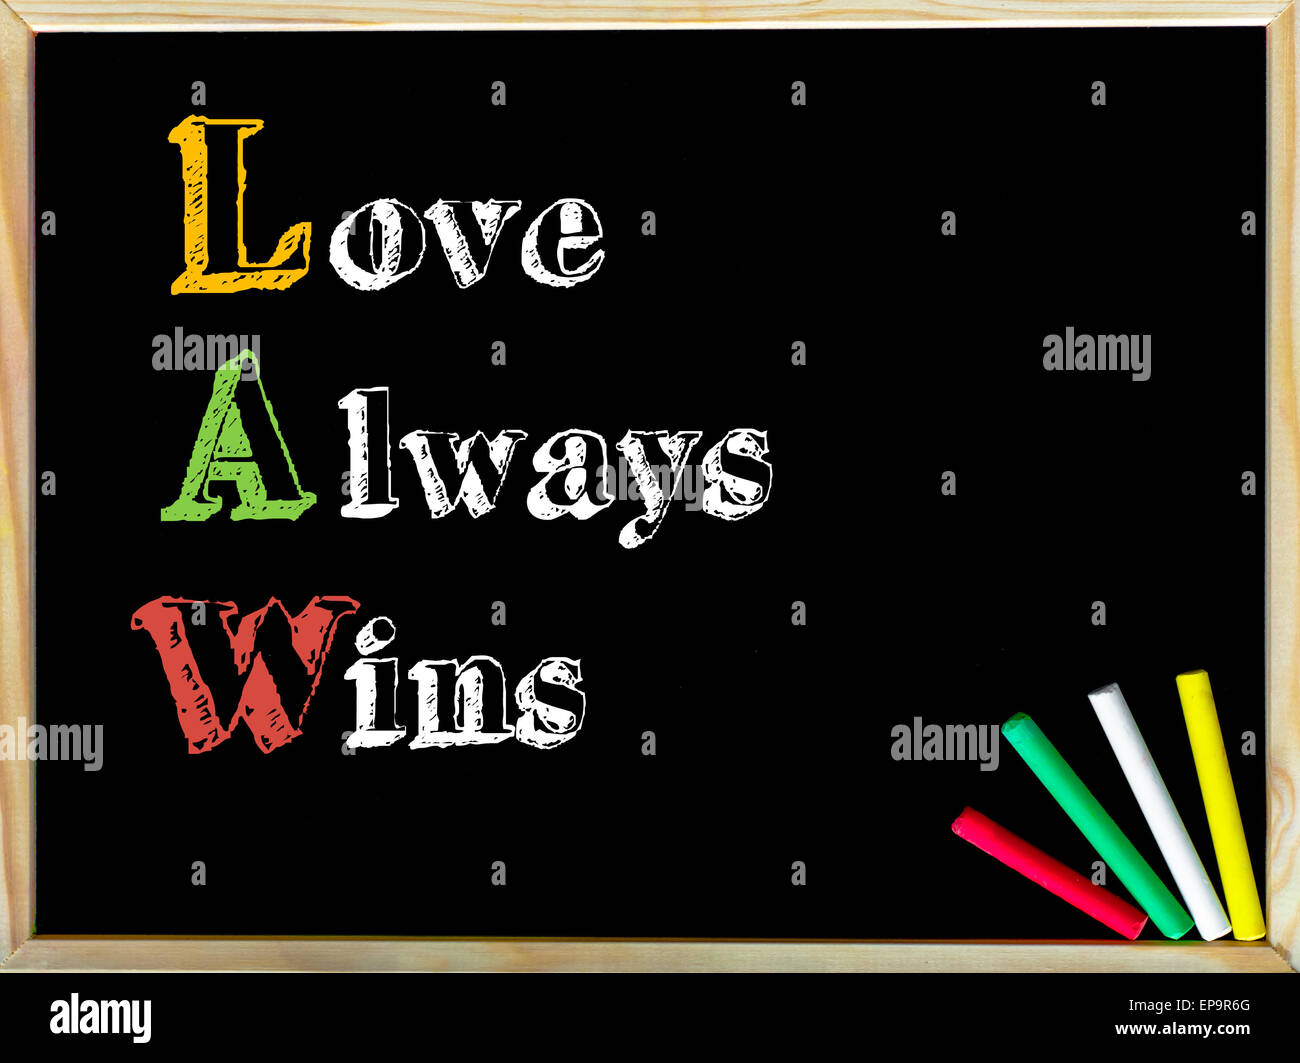 Acronym LAW as LOVE ALWAYS WINS. Written note on wooden frame blackboard,  colored chalk in the corner. Motivational Concept image Stock Photo - Alamy